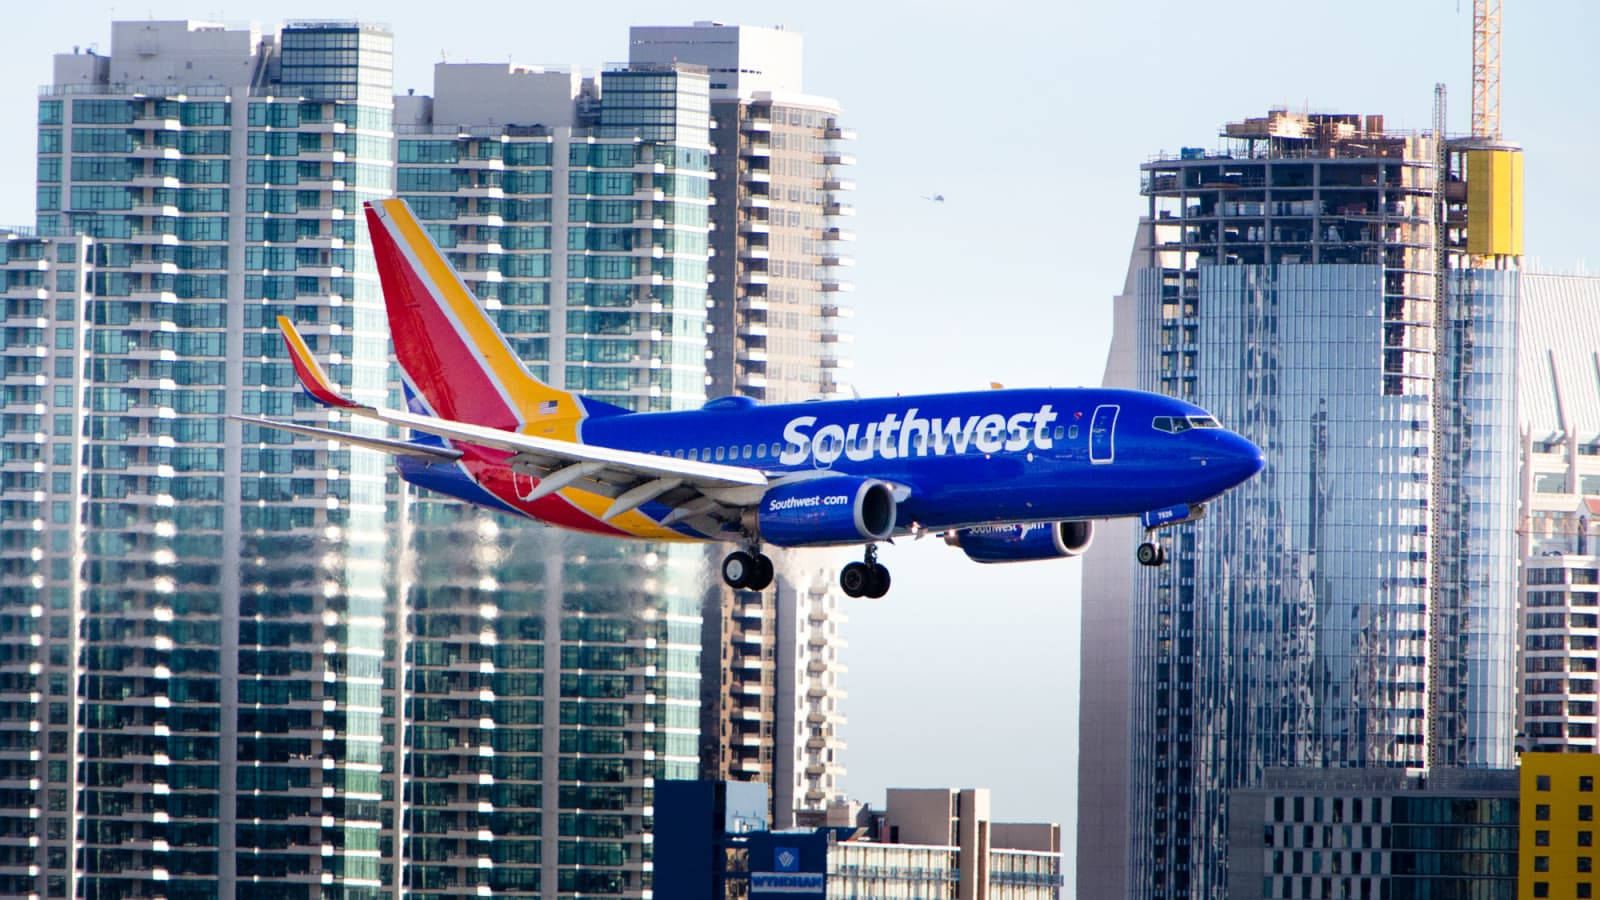 Southwest Airlines Pictures  Download Free Images on Unsplash